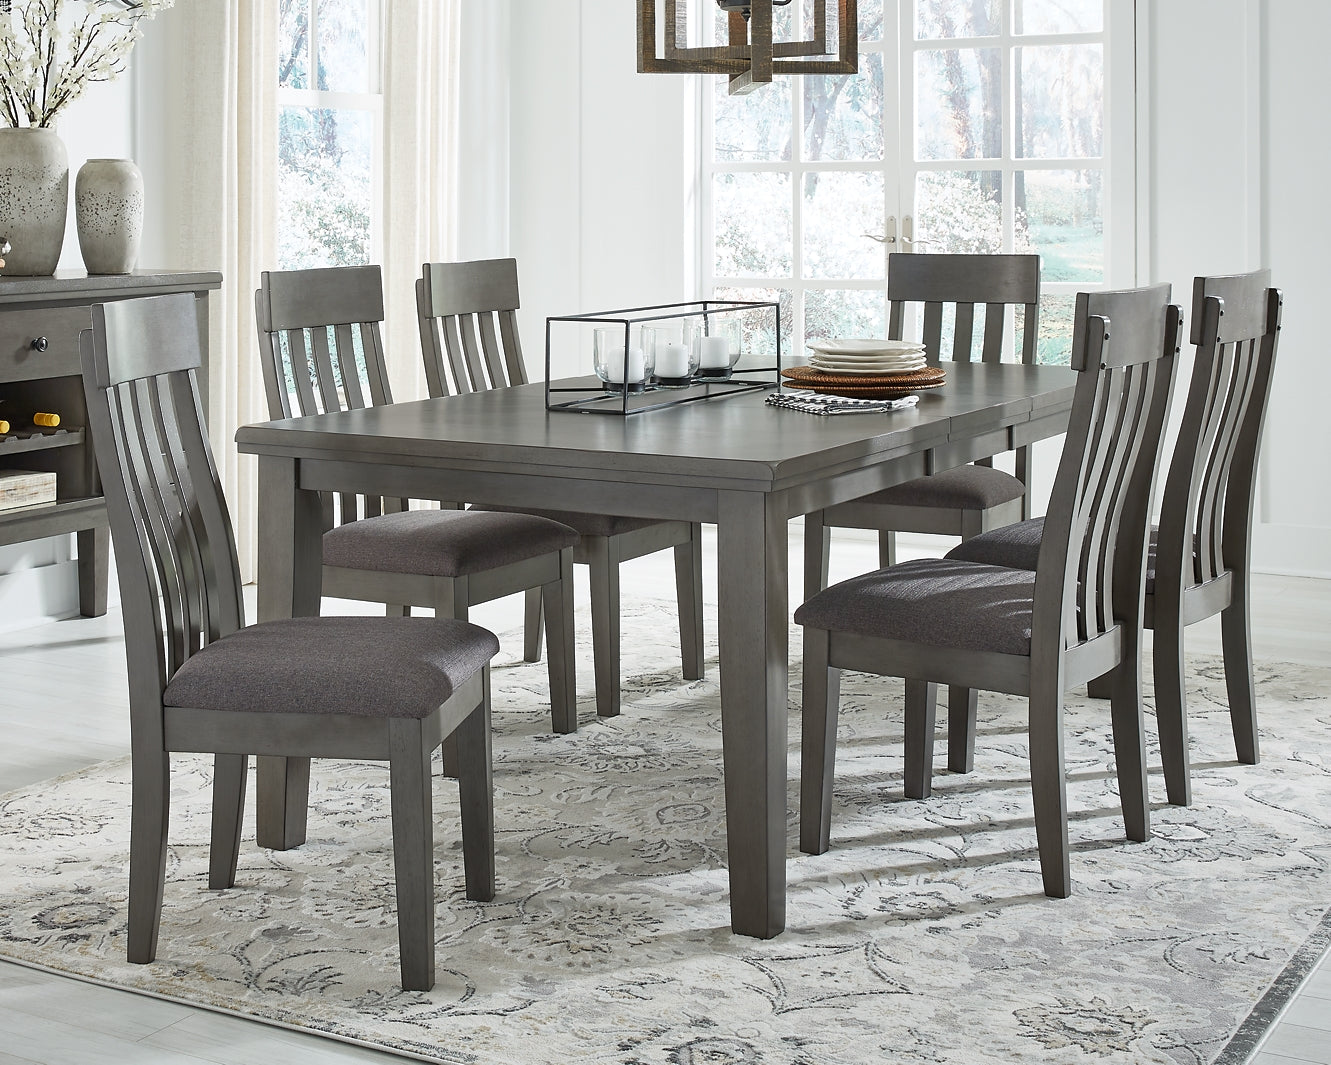 Hallanden Dining Table and 6 Chairs with Storage